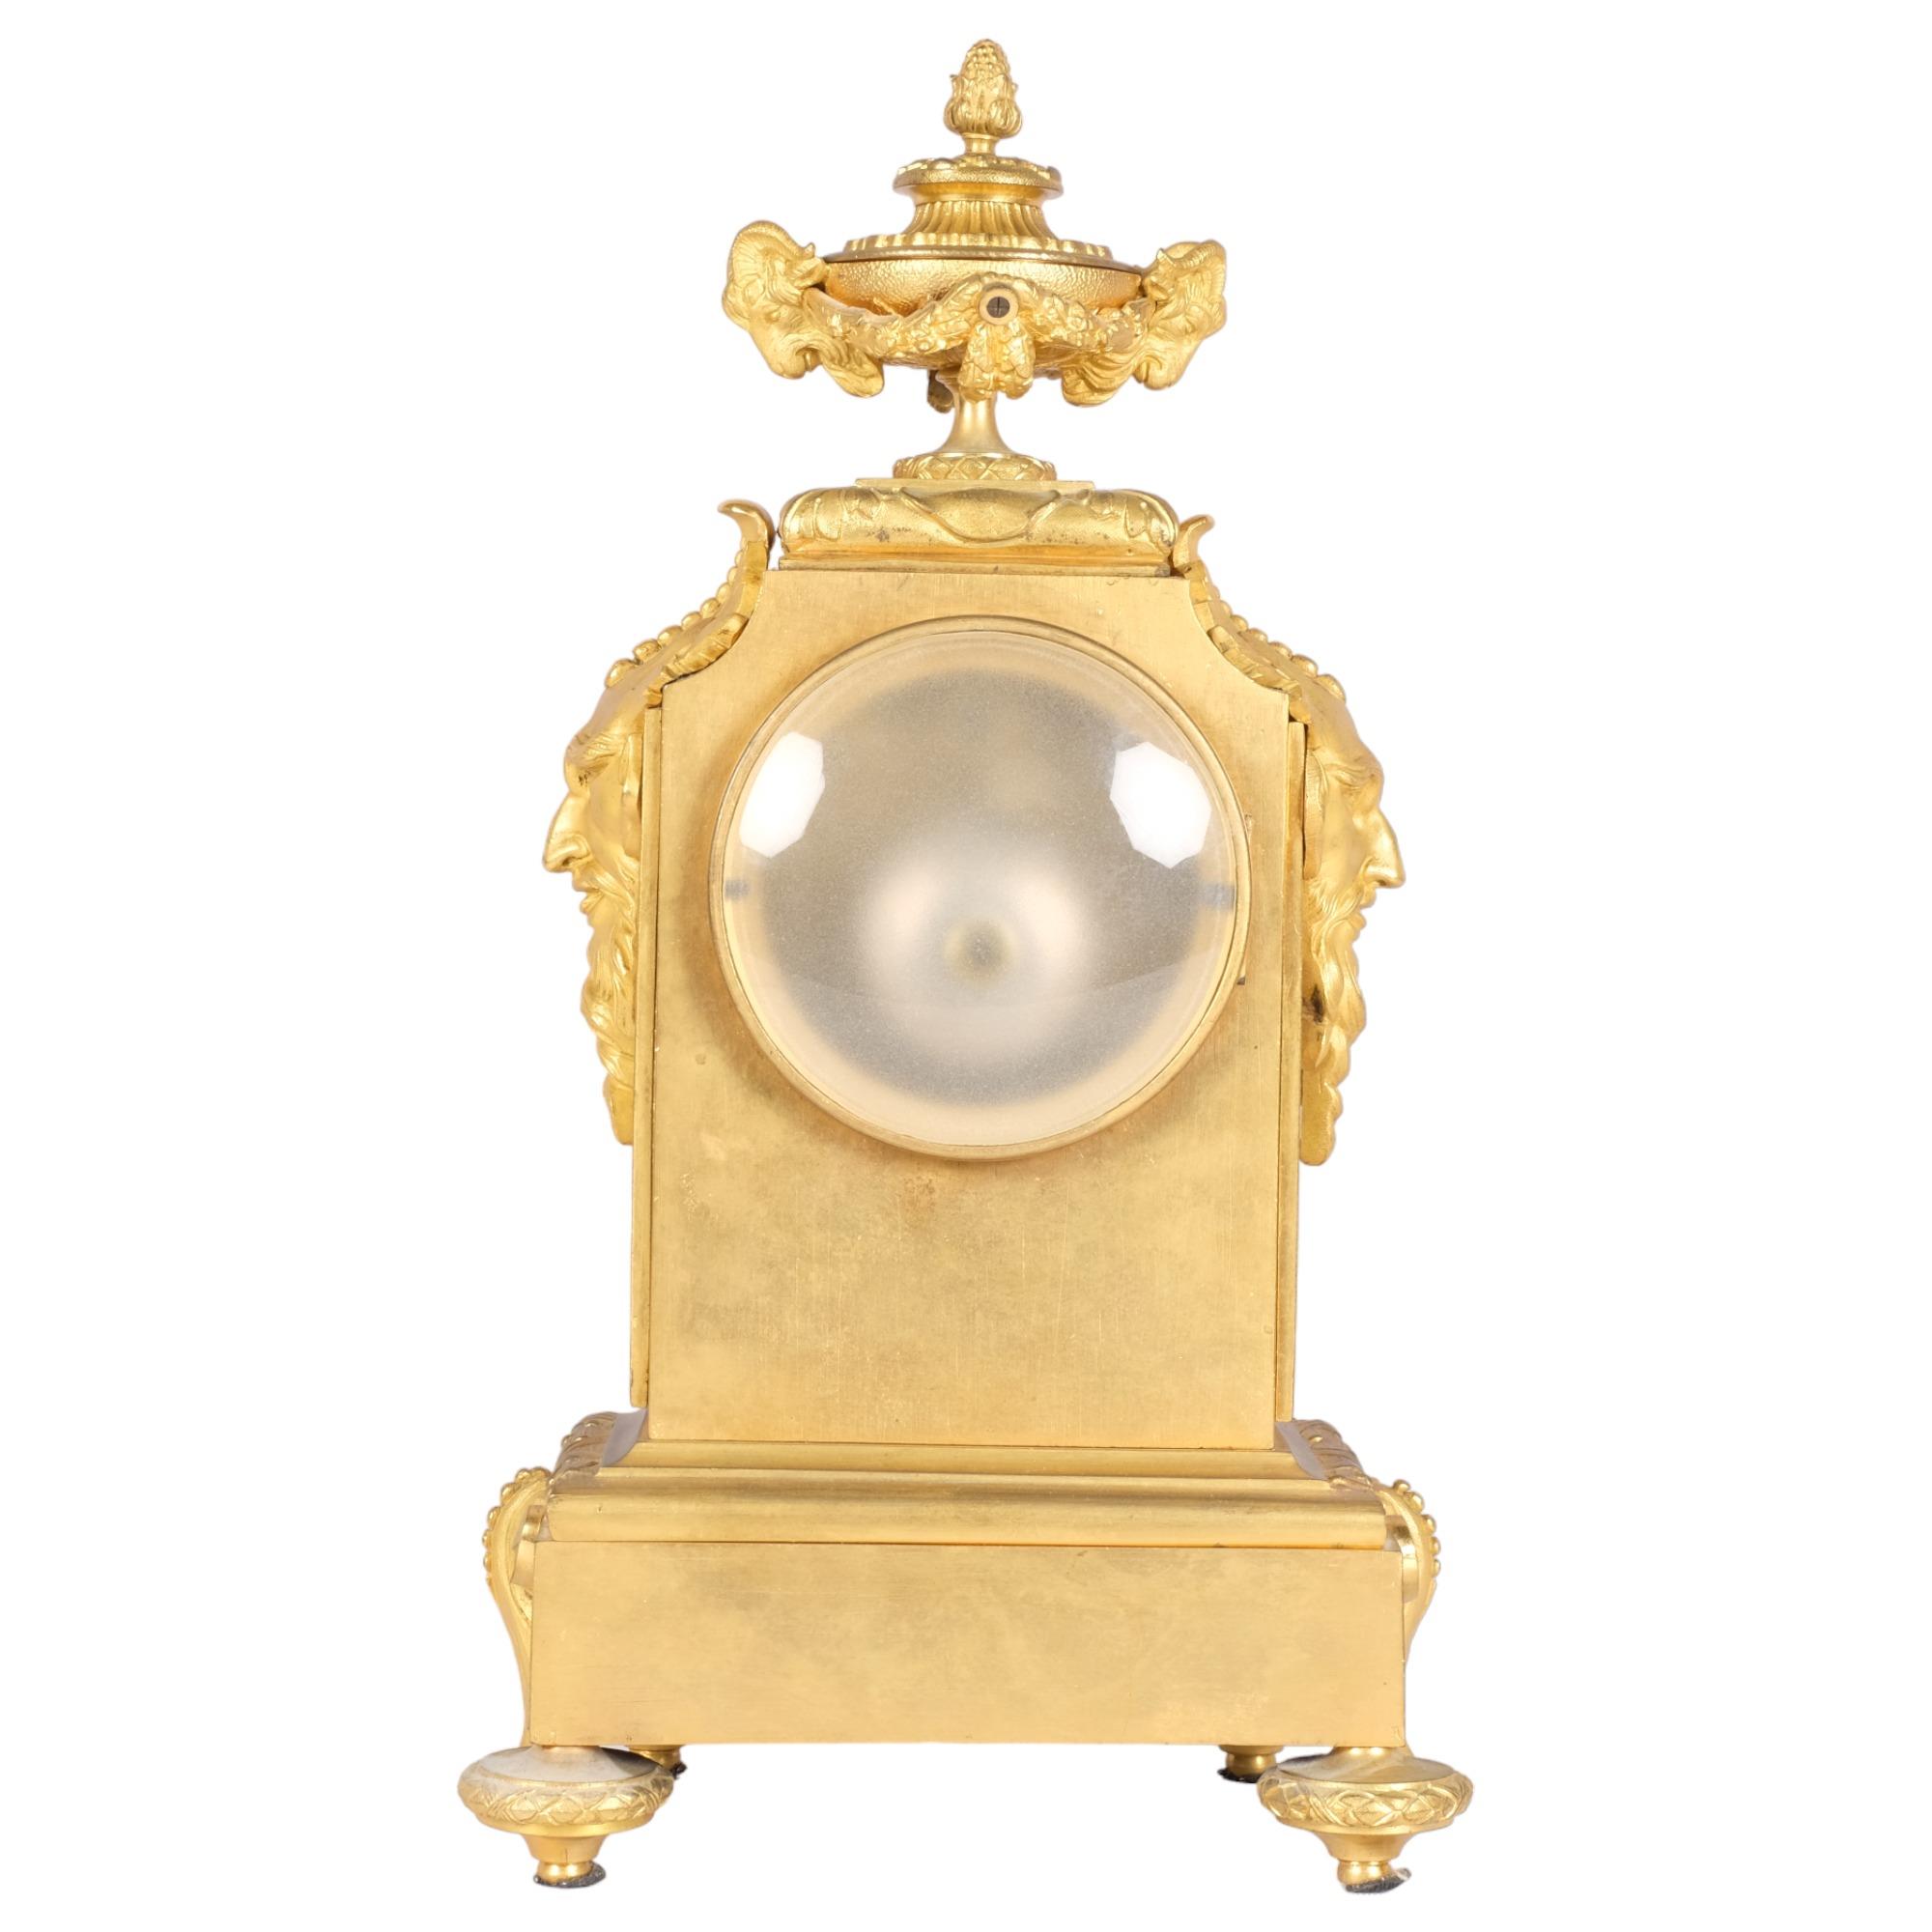 Good quality 19th century French ormolu and alabaster Rococo style mantel clock, surmounted by an - Image 2 of 3